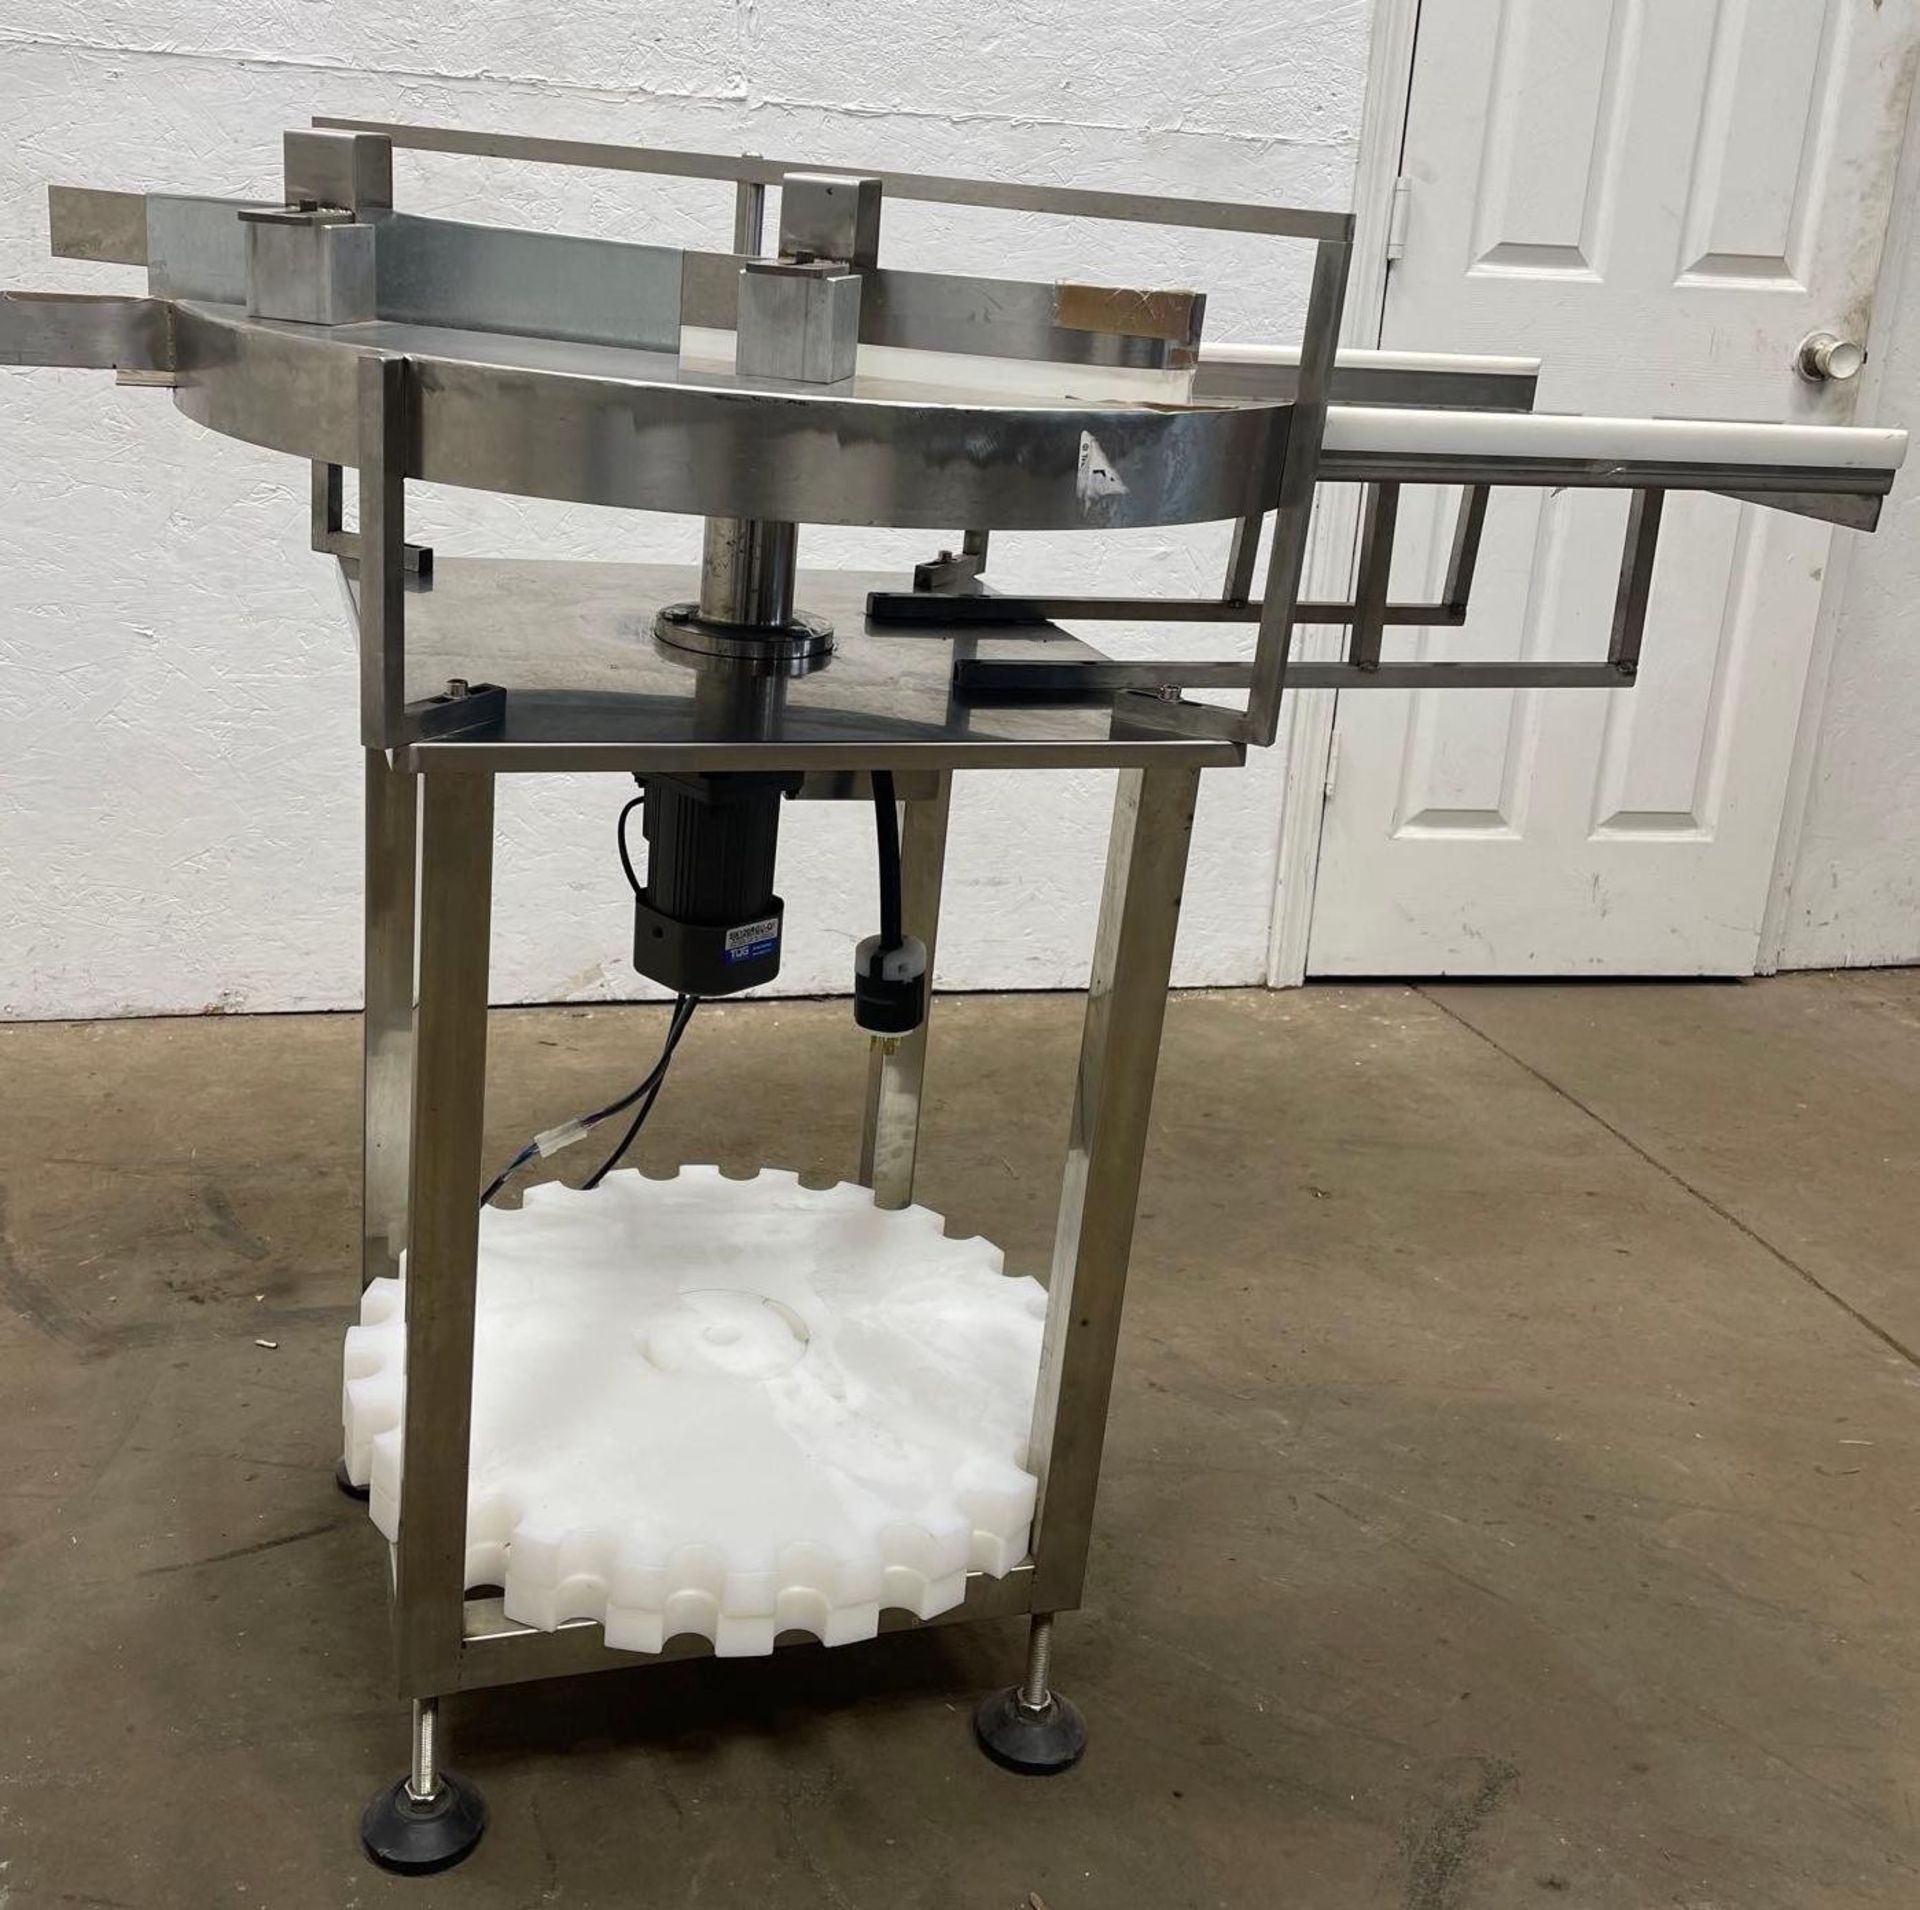 Stainless Steel Unscrambler Station, Approx Dims: 43 x 30 x 43, ($25 Basic Lift & Load, $100 to - Image 4 of 9